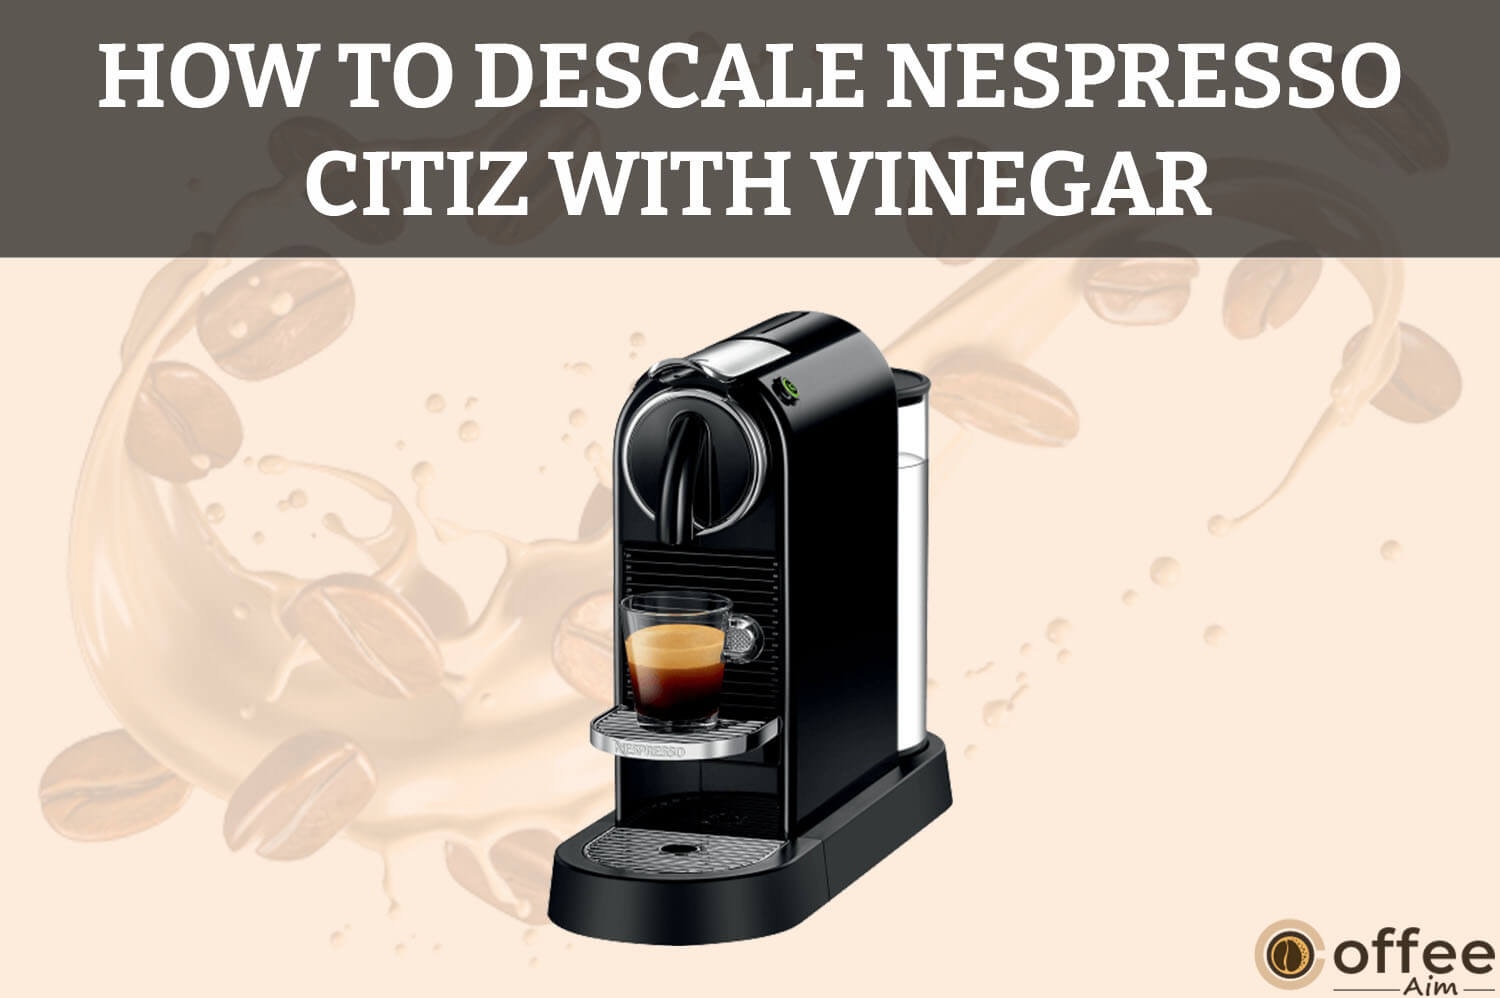 Featured image for the article "How To Descale Nespresso Citiz With Vinegar"